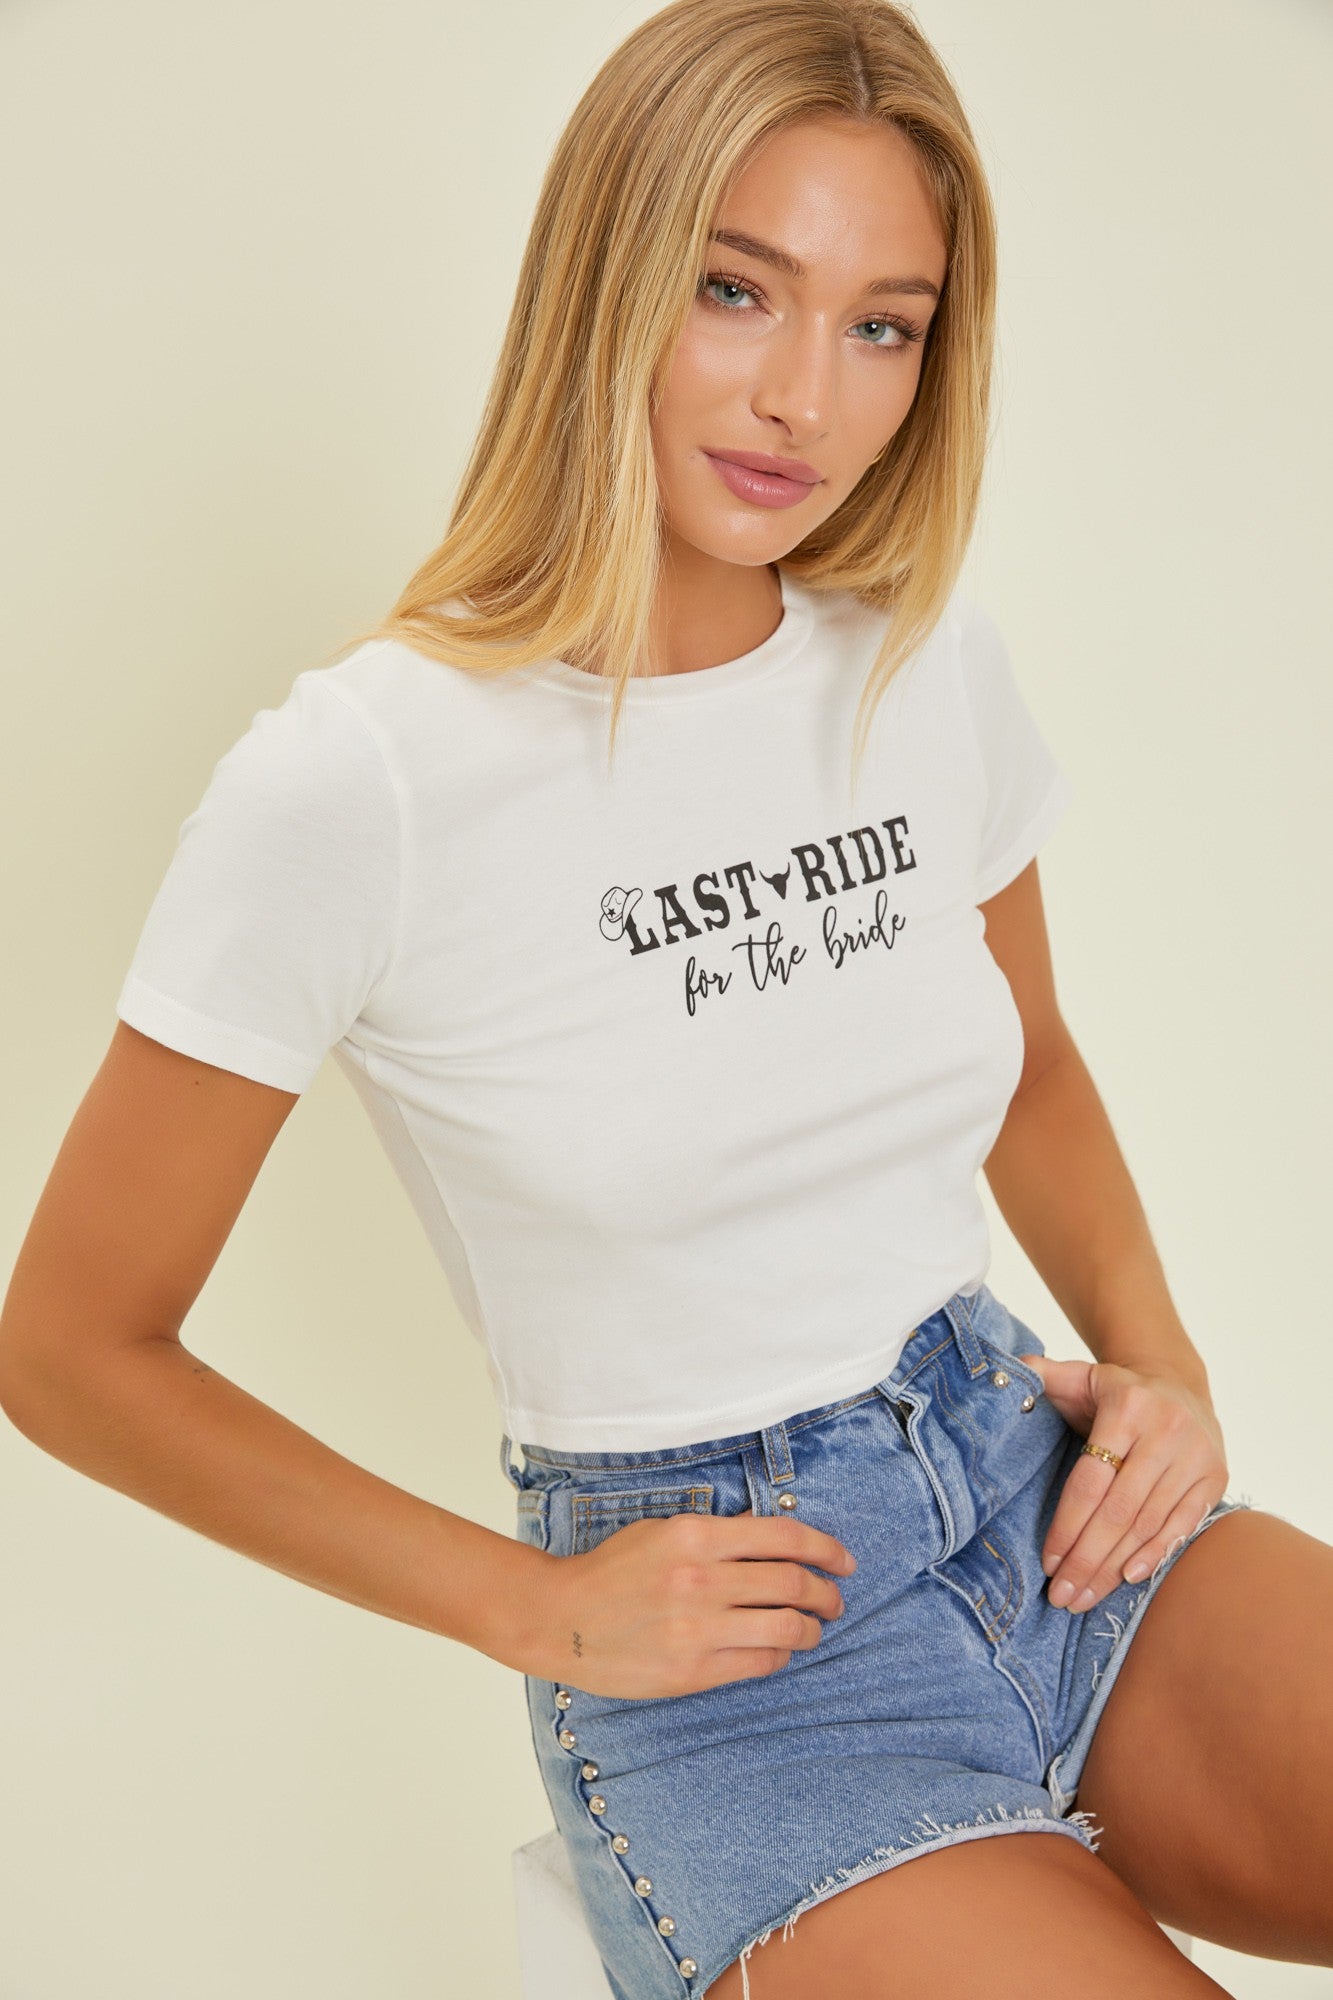 Last Ride For the Bride Baby Tee